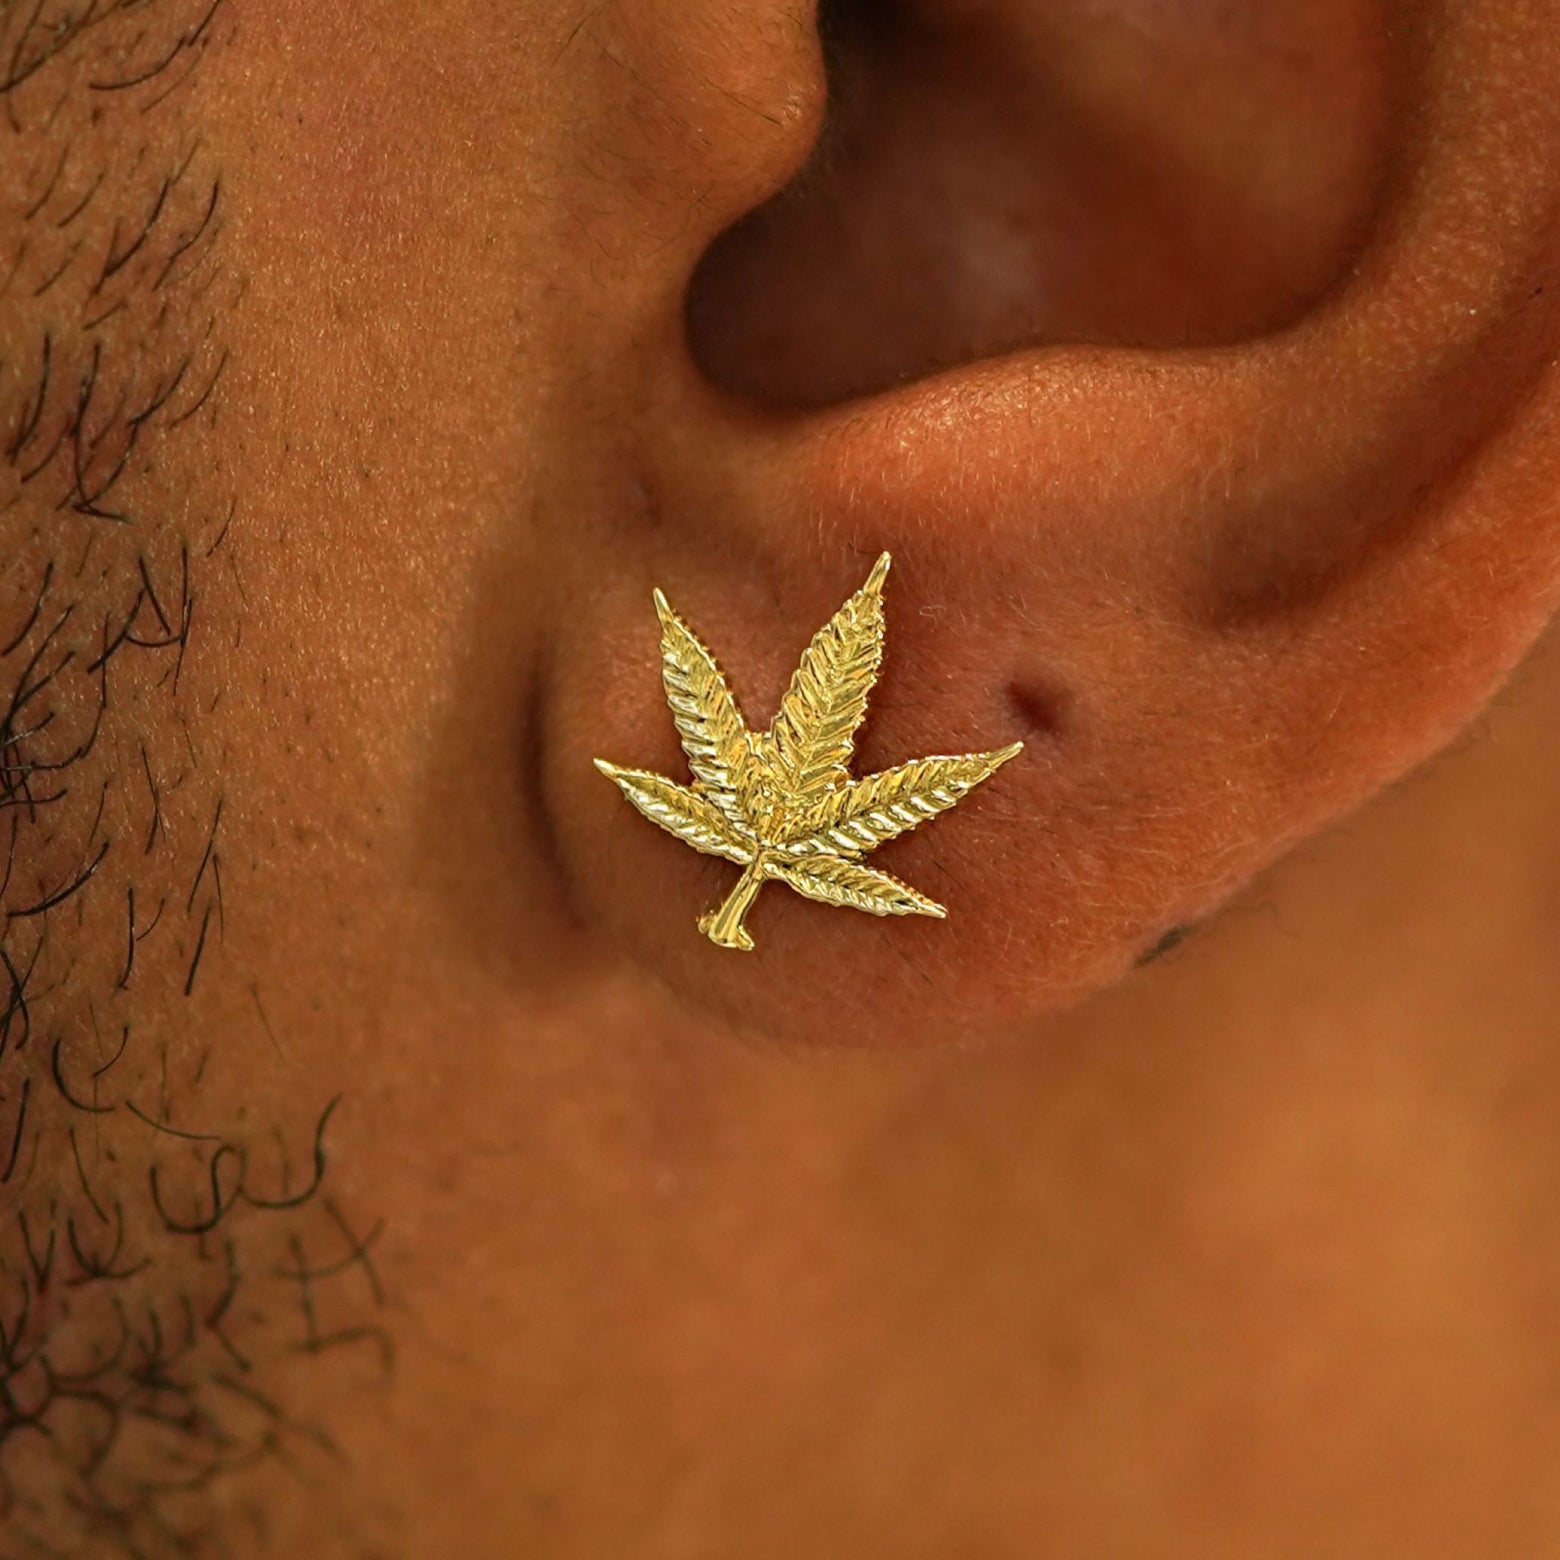 Close up view of a model's ear wearing a 14k gold Cannabis Stud Earring